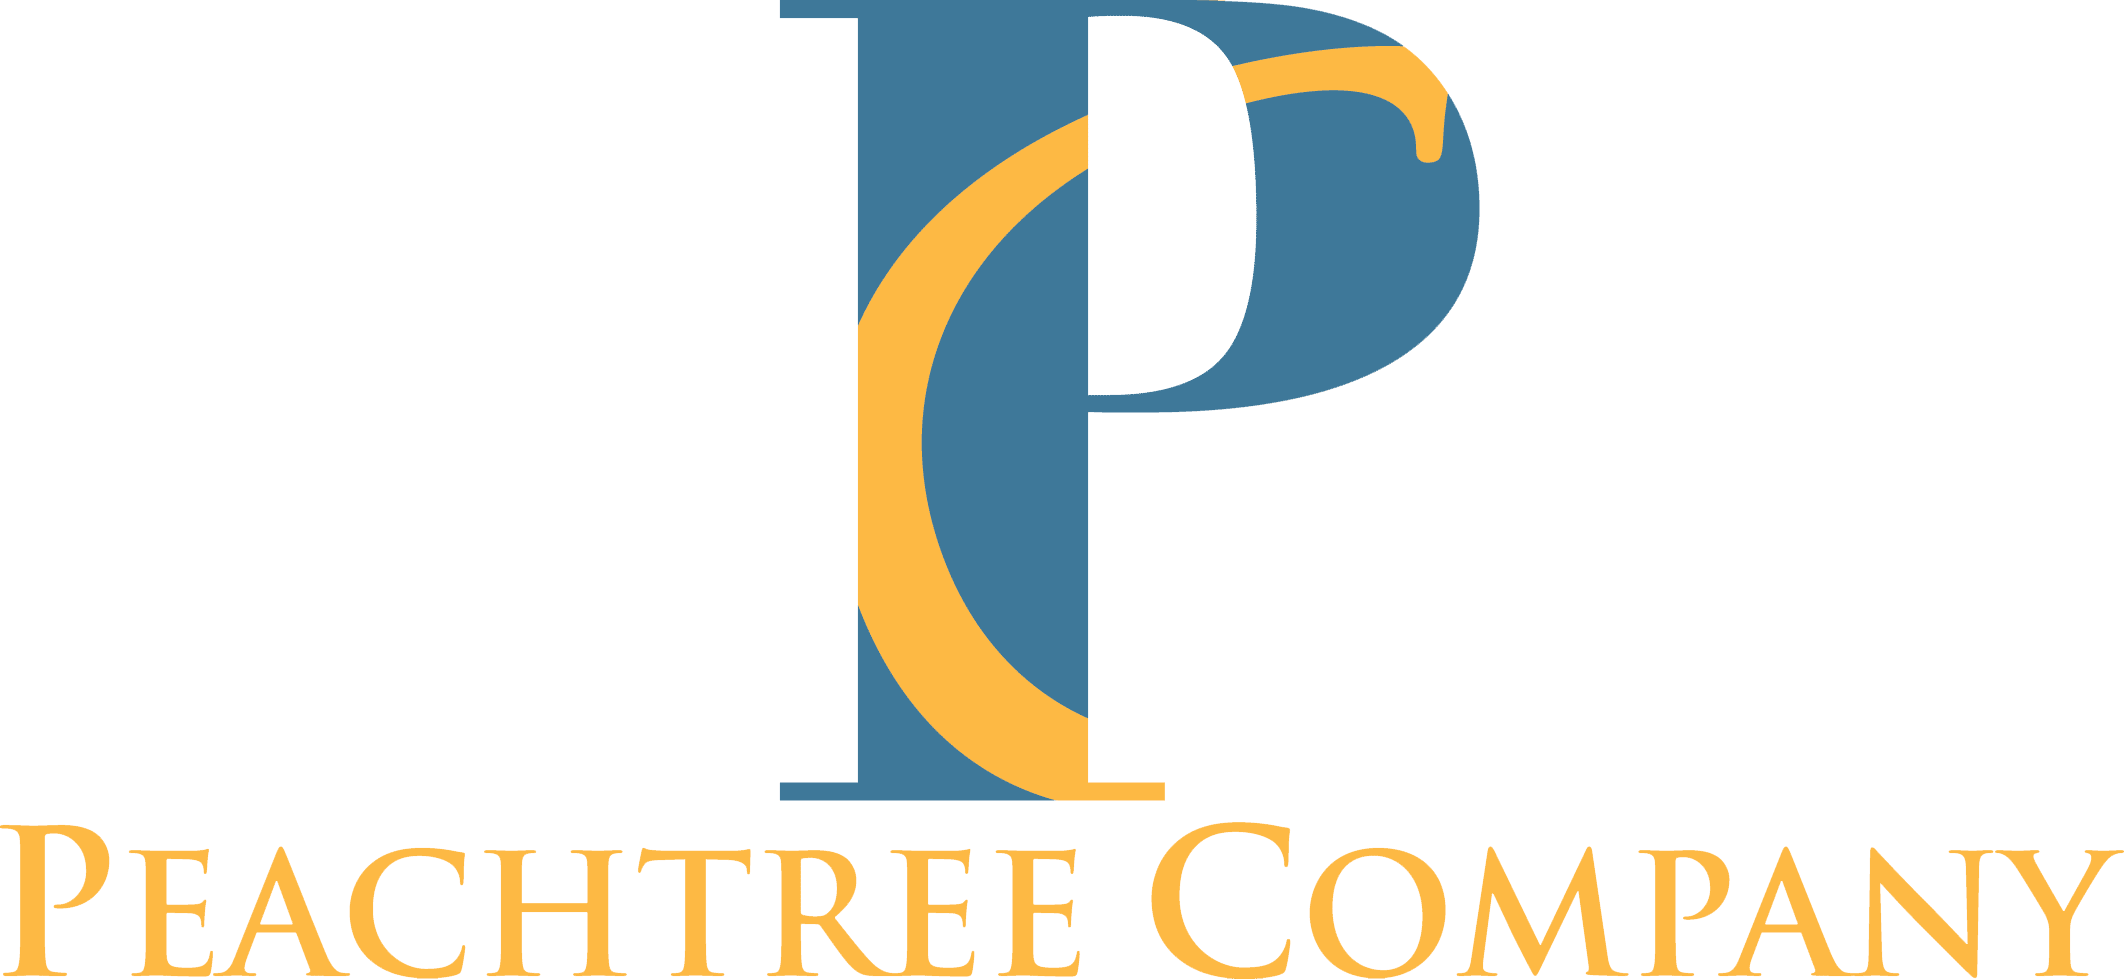 Peachtree Logo - Welcome to Peachtree!